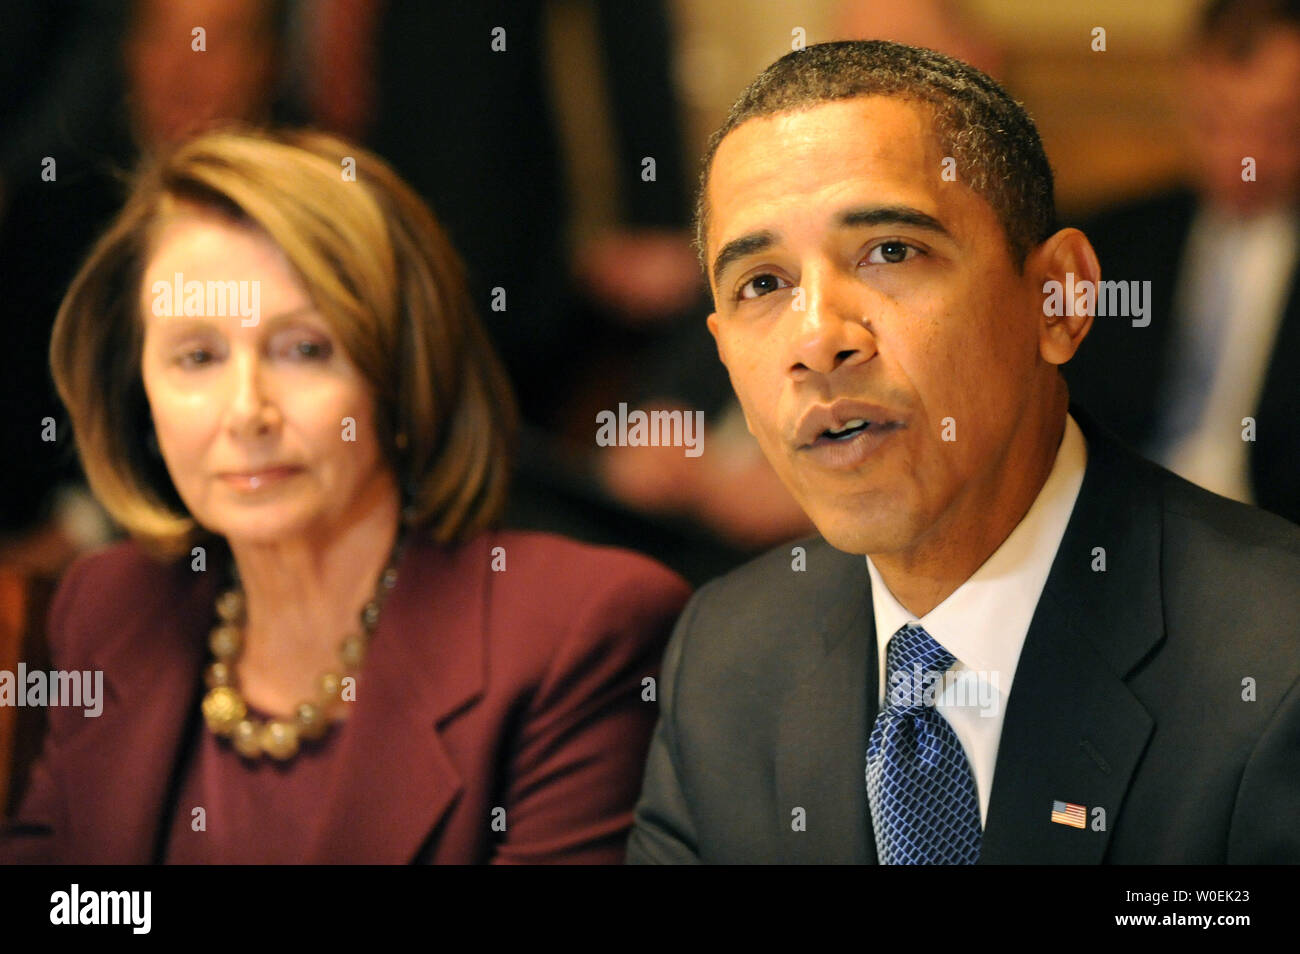 President-elect Barack Obama (R) delivers remarks alongside Speaker of the House Nancy Pelosi (D-CA) during a meeting with Congressional leaders on Capitol Hill in Washington on January 5, 2008. (UPI Photo/Kevin Dietsch) Stock Photo